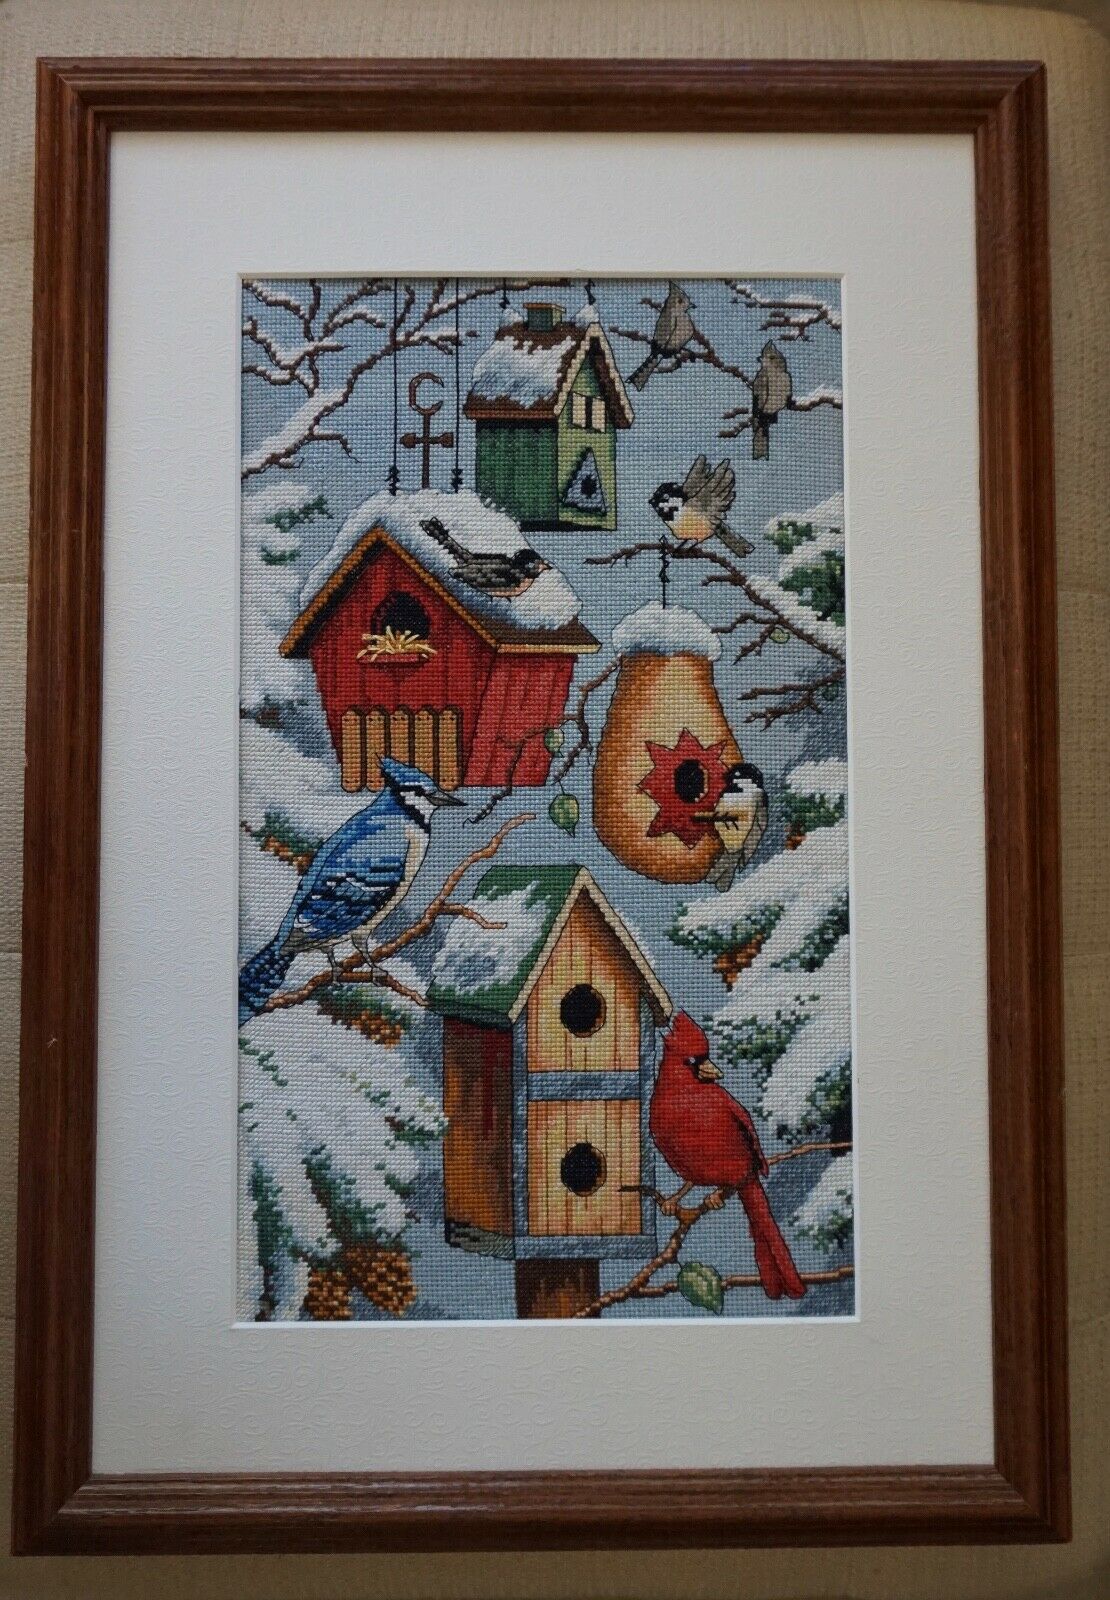 Counted Cross Stitch Birds Birdhouse Completed Framed Finished Picture Snow